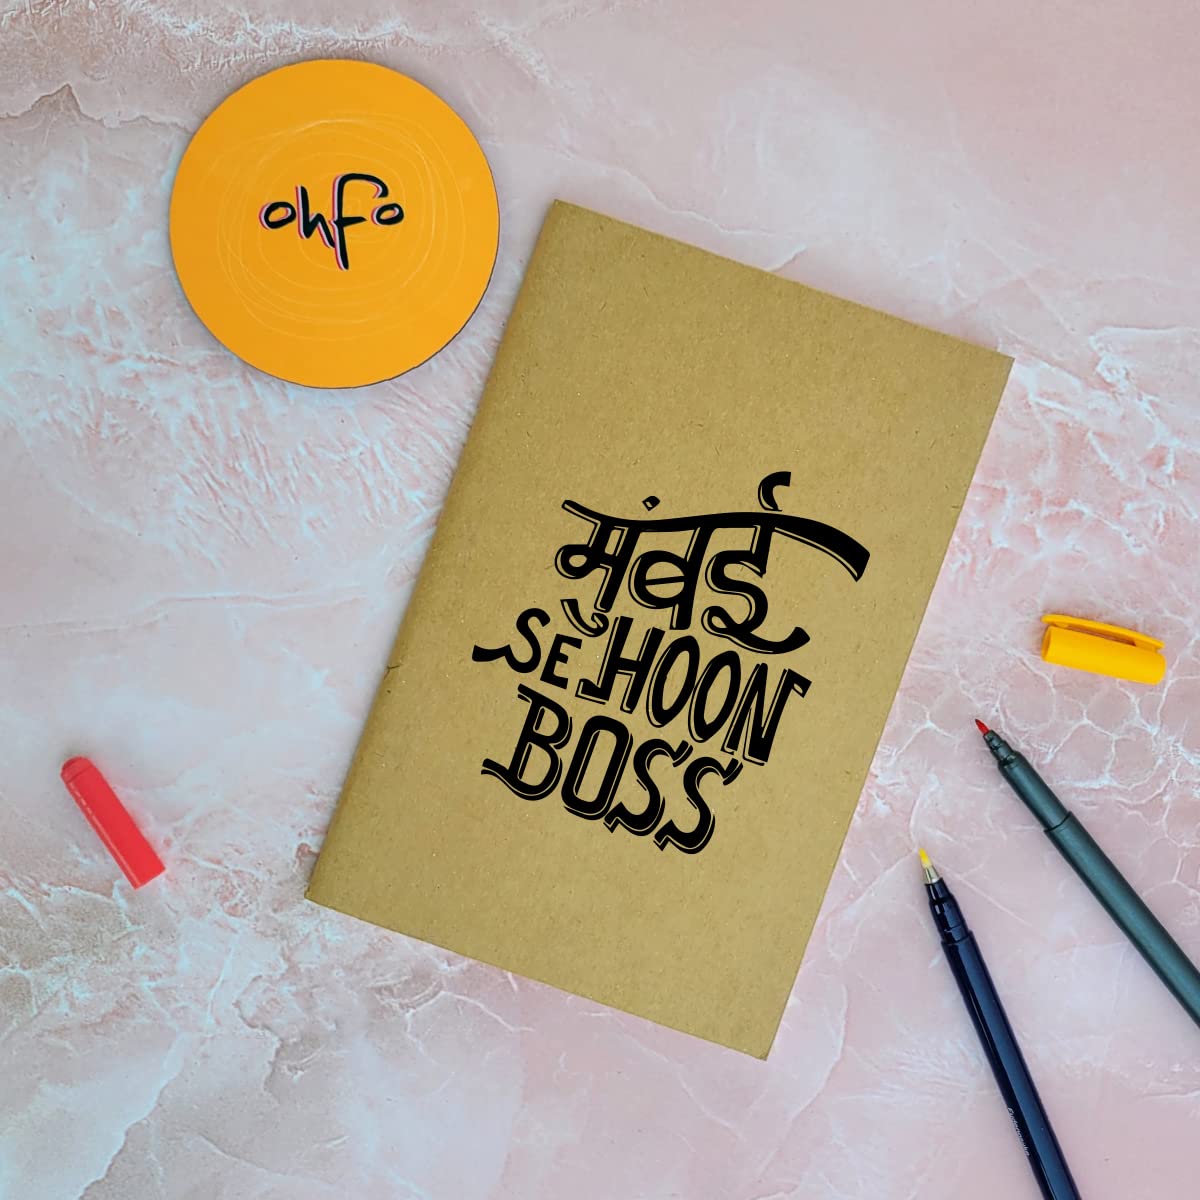 Mumbai Se Hun Boss - Brown A5 Doodle Notebook - Kraft Cover Notebook - A5 - 300 GSM Kraft Cover - Handmade - Unruled - 80 Pages - Natural Shade Pages 120 GSM - Funny Quotes & Quirky, Funky designs